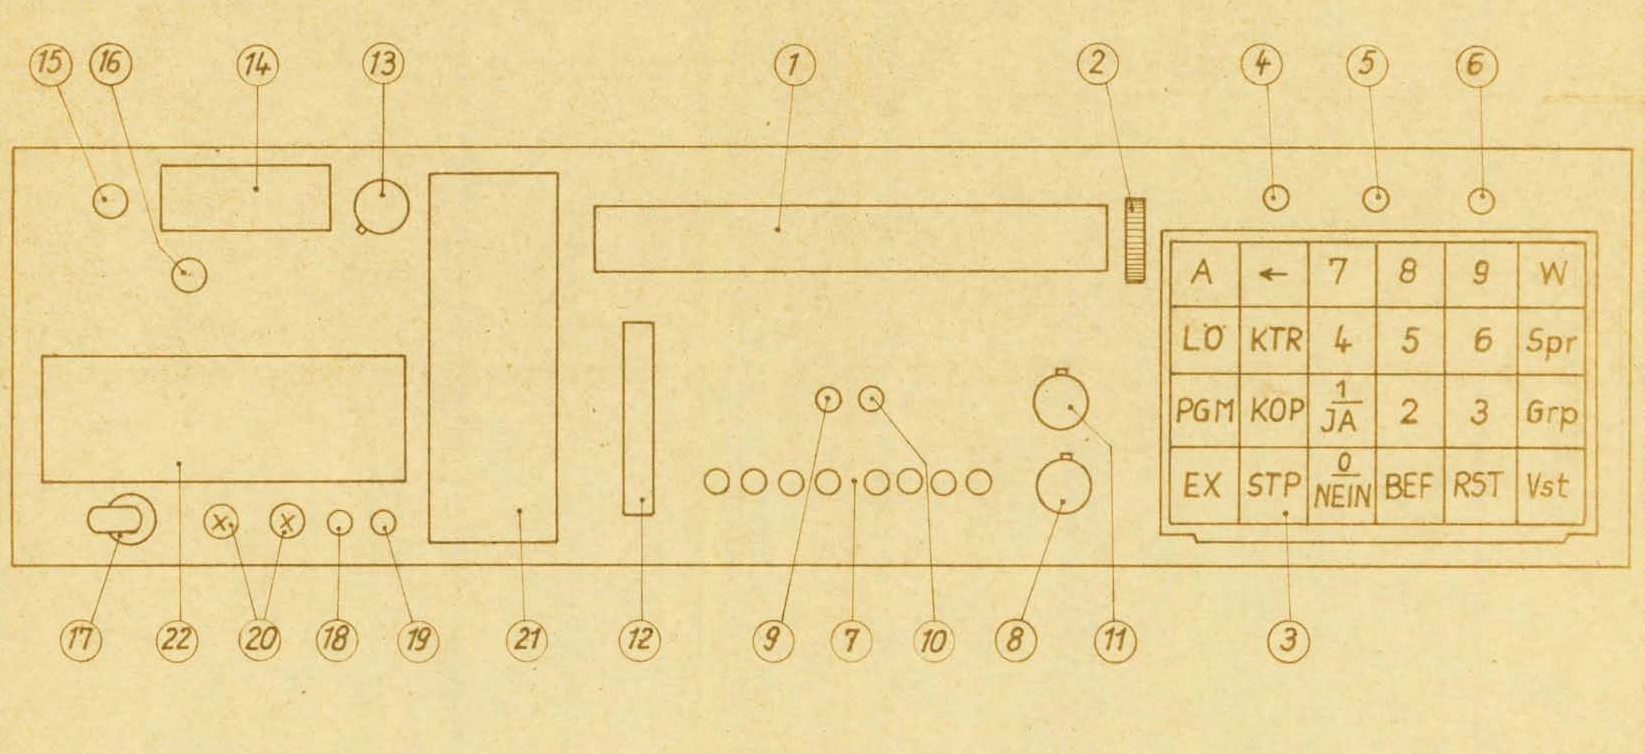 Technical drawing of the front of the device, with keyboard, display and slots for programming and deleting cartridges.